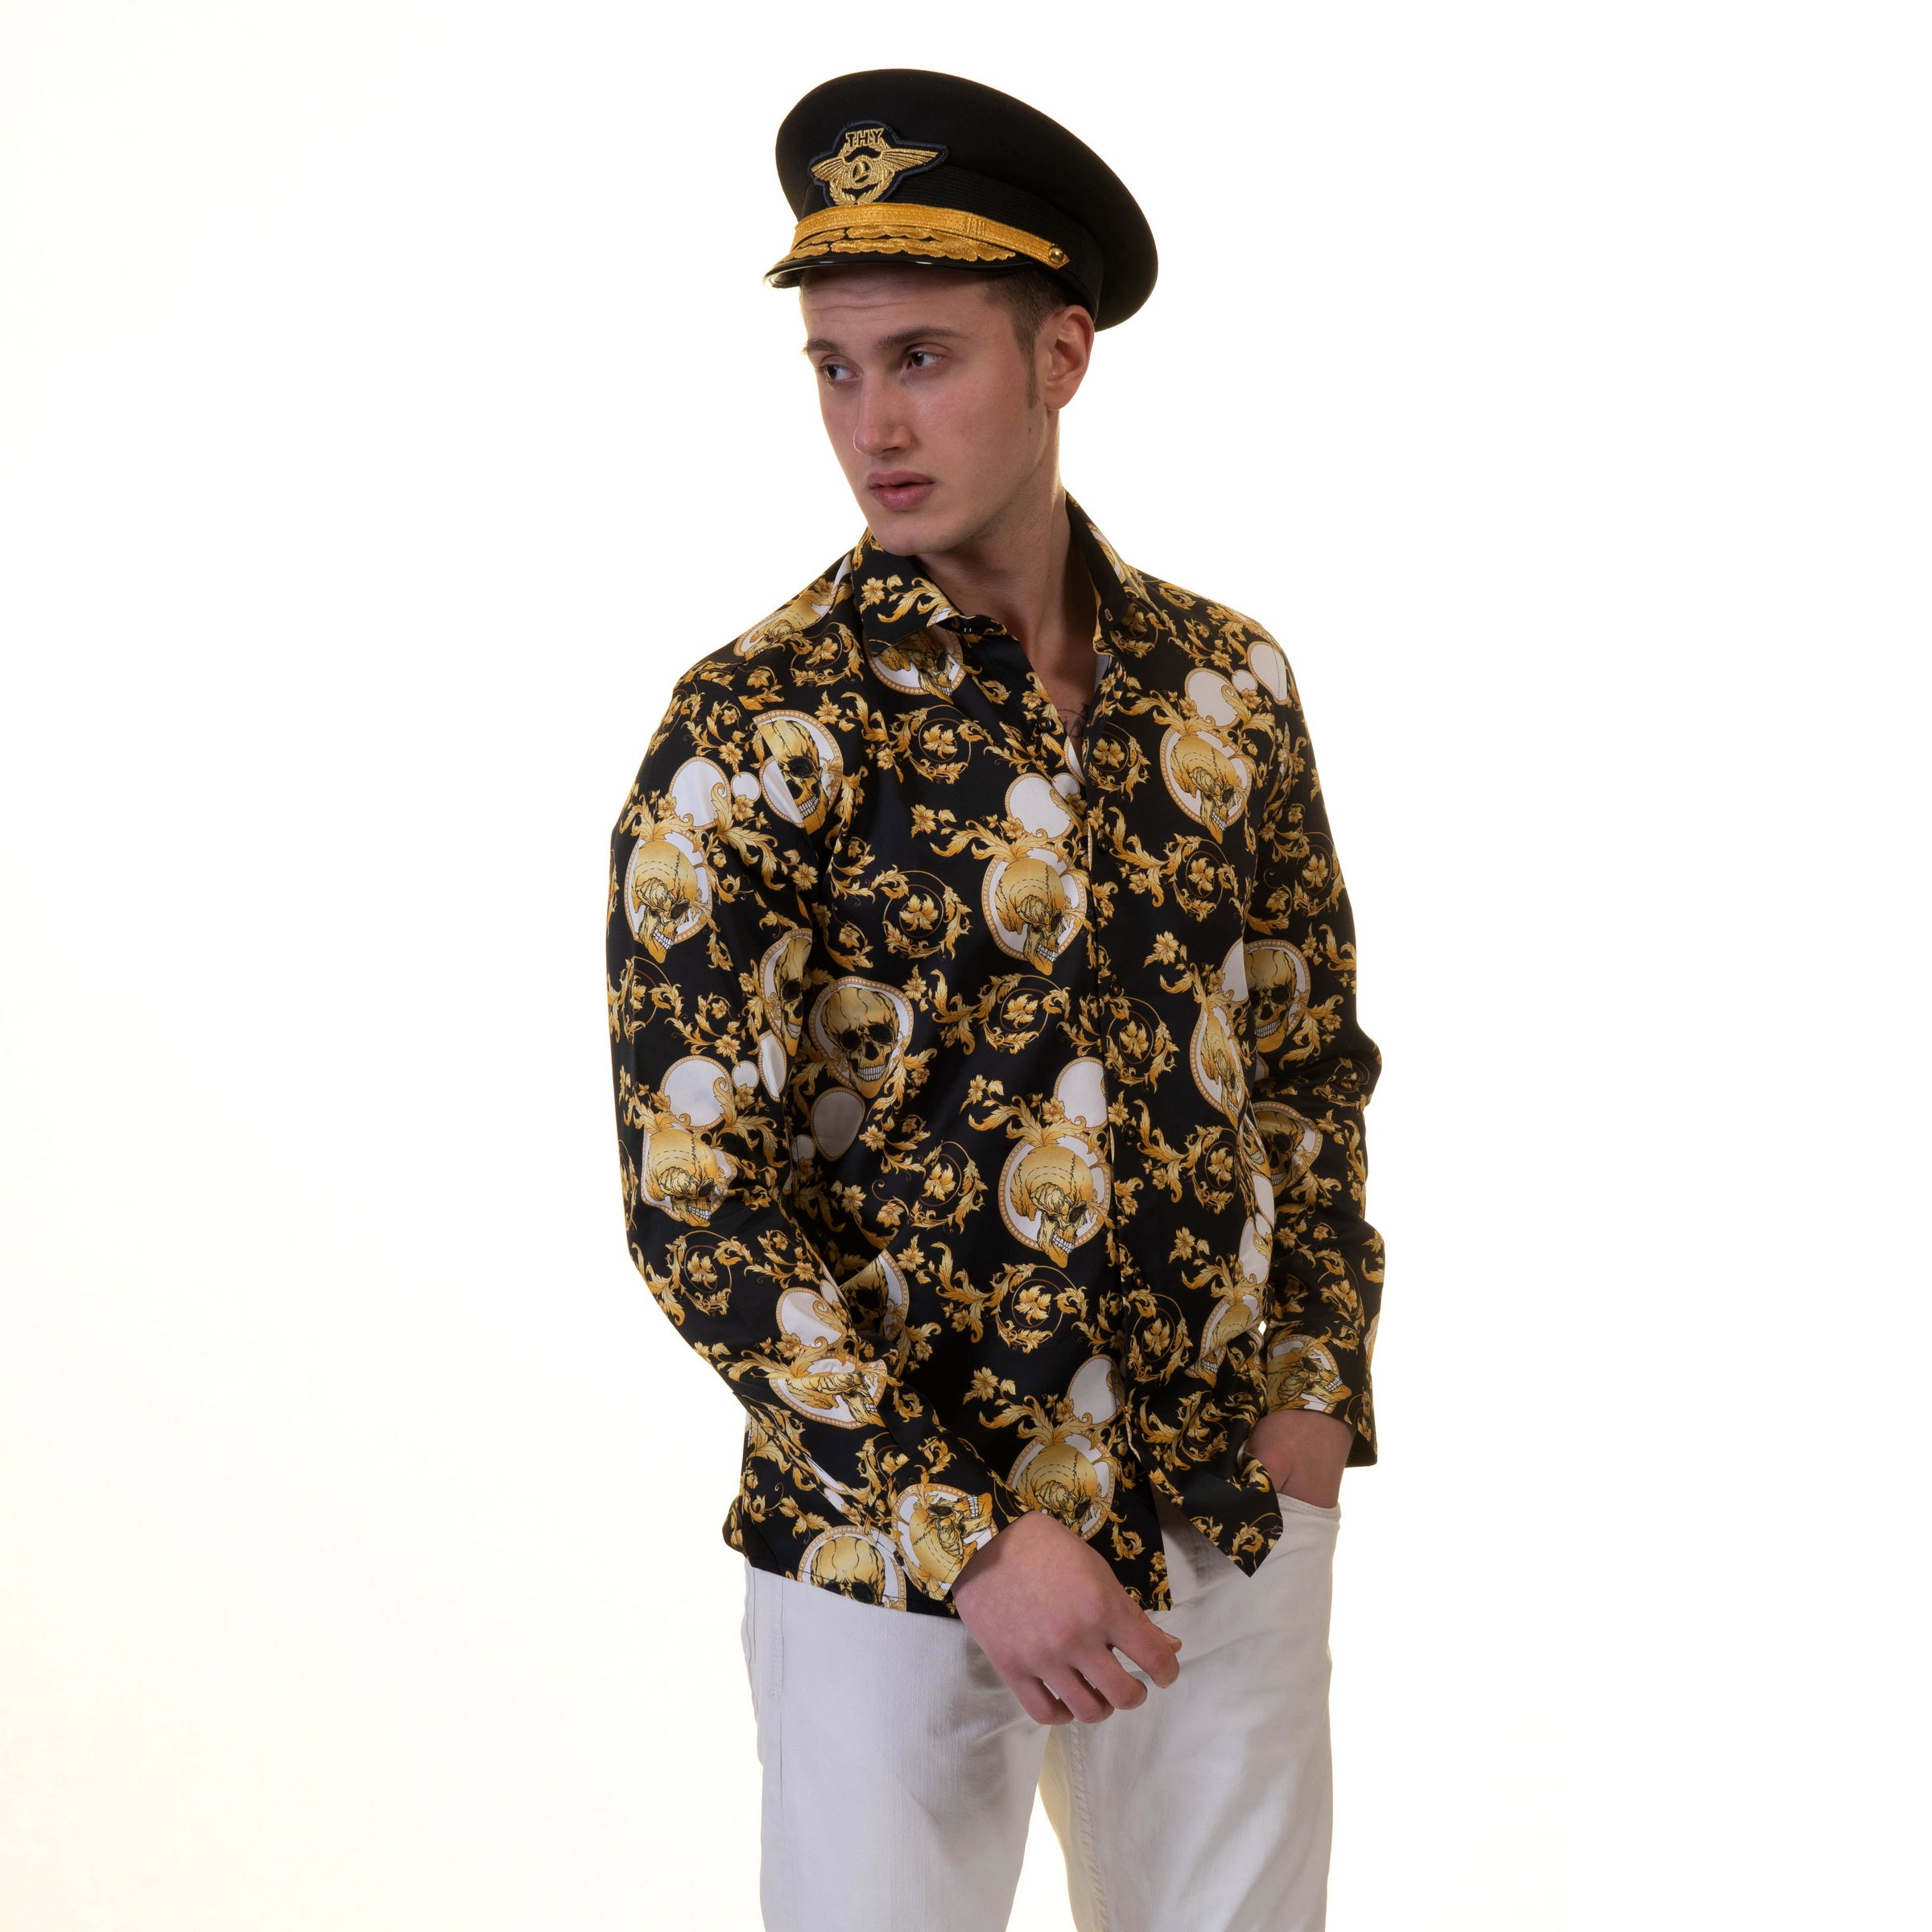 Black with Gold Skulls Mens Slim Fit Designer French Cuff Shirt - tailored Cotton Shirts for Work and Casual Wear